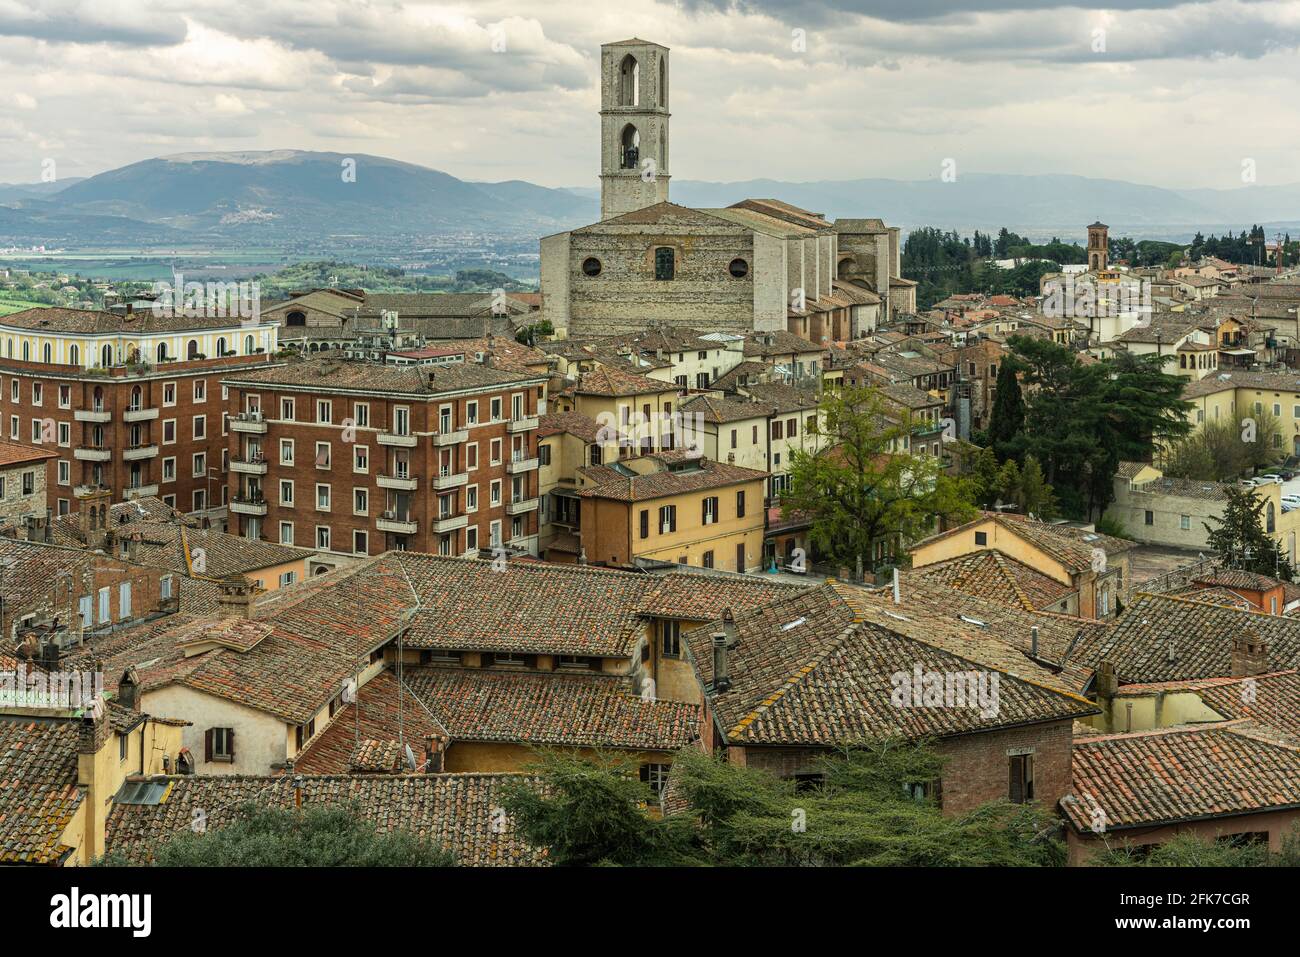 Urban landscape of the city of Perugia. Imposing The convent of San Domenico with its Romanesque bell tower. Perugia, Umbria, Italy, Europe Stock Photo